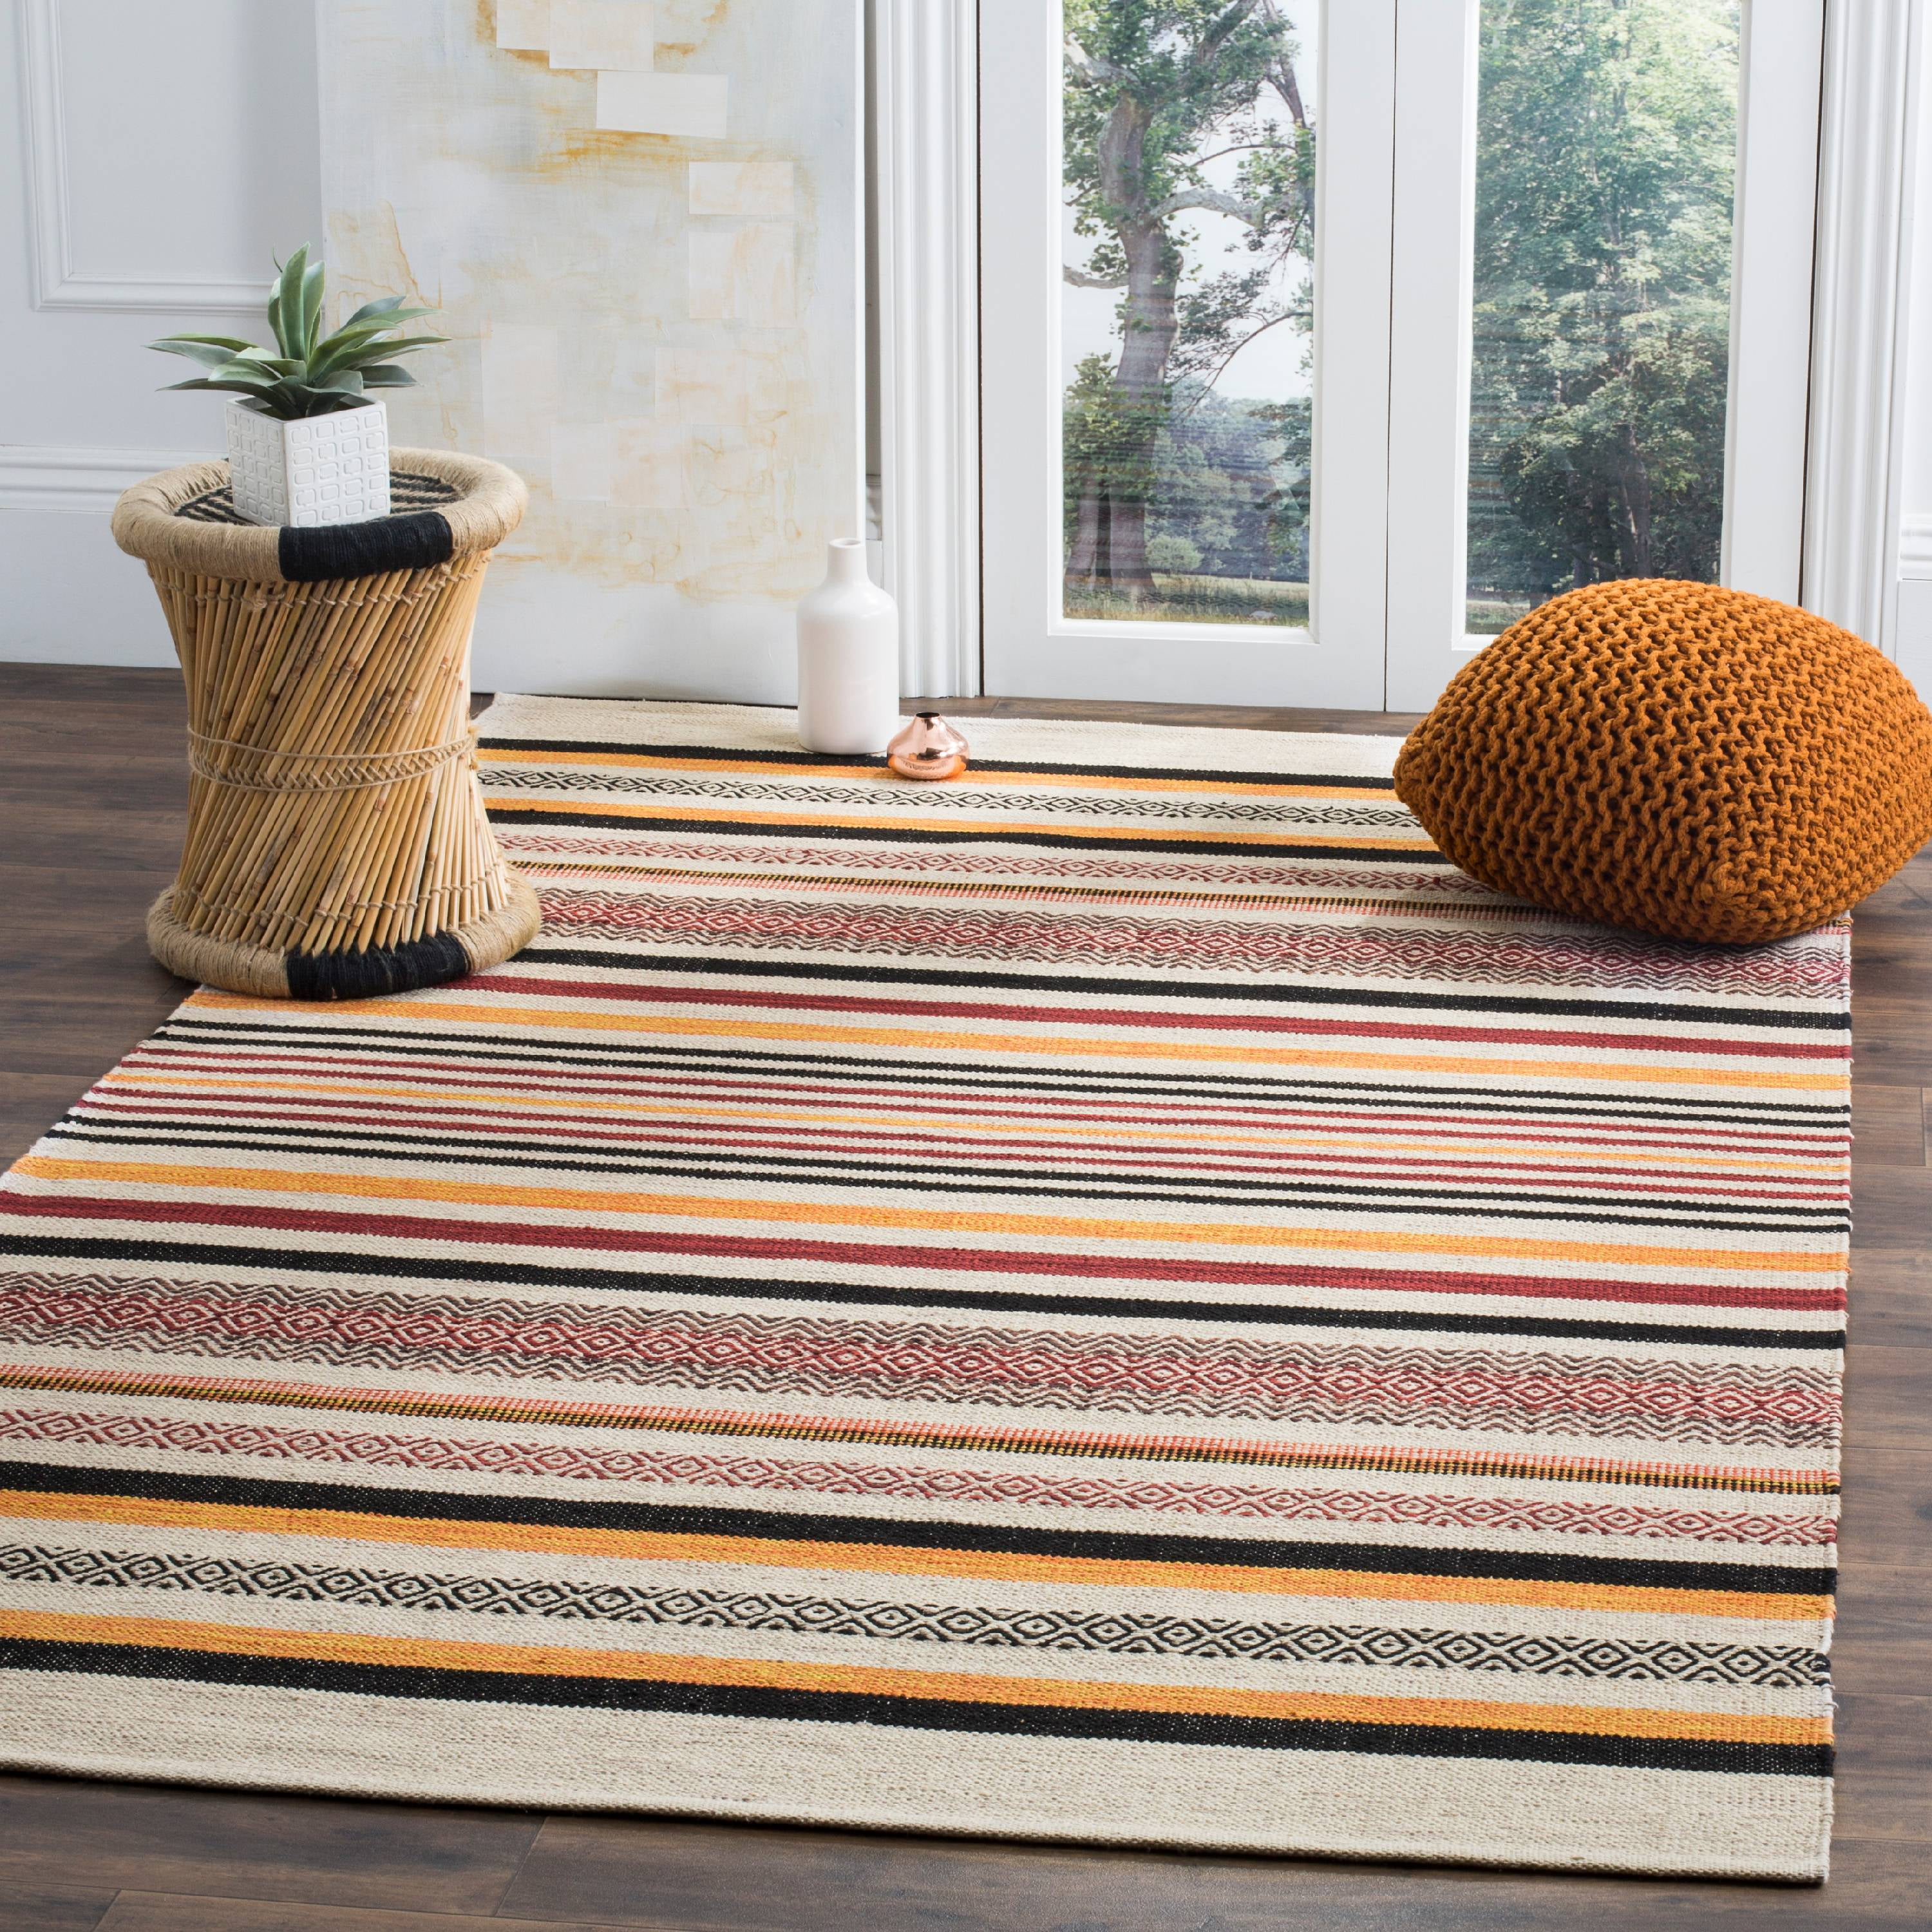 Broadway Leather Stripe Rug 24X36 Red 